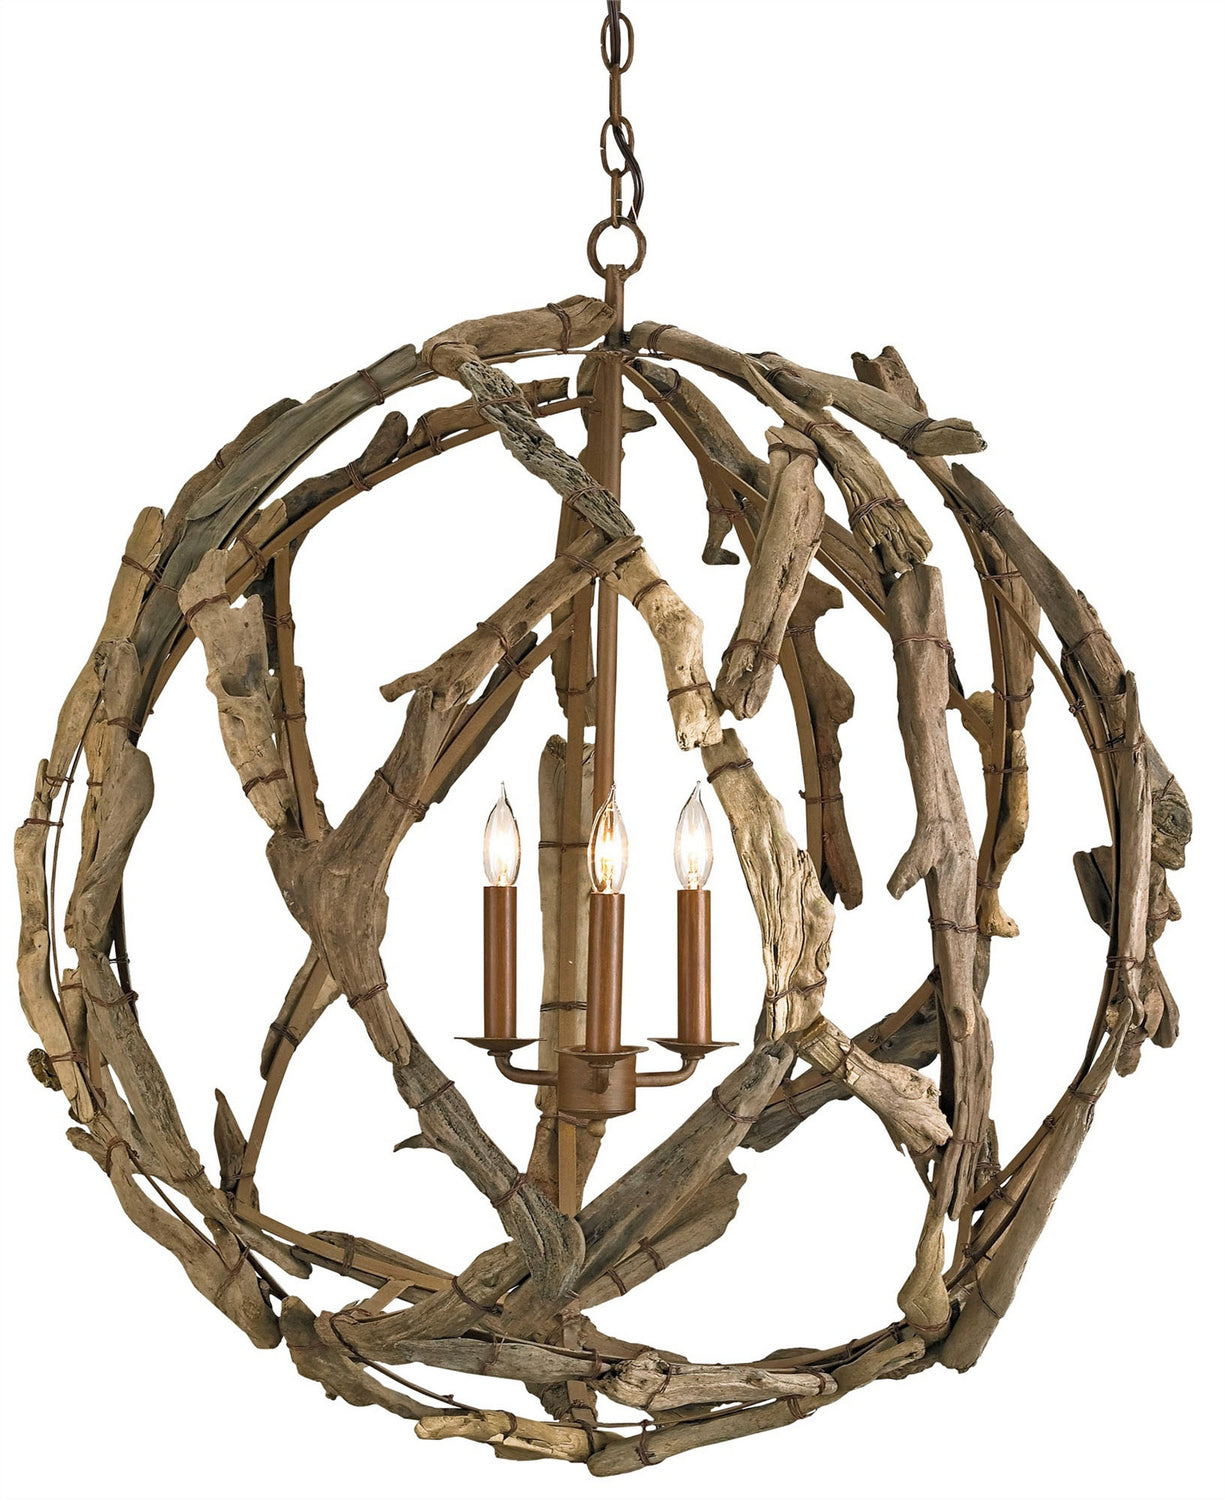 Three Light Chandelier from the Driftwood collection in Natural/Washed Driftwood finish